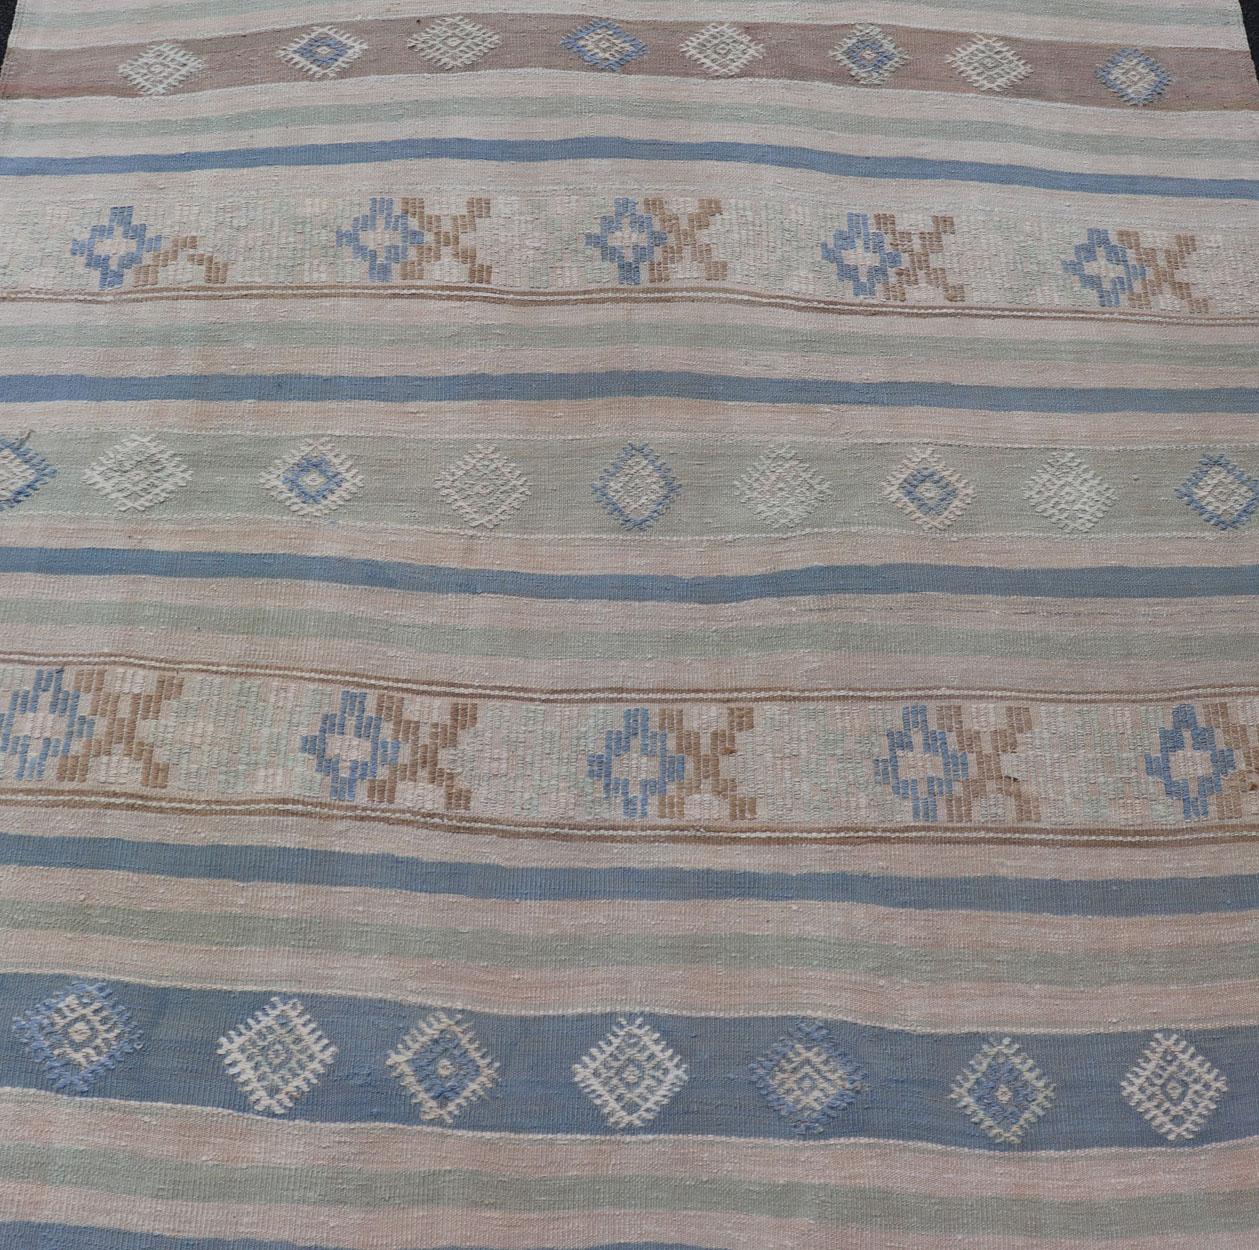 Hand-Woven Vintage Turkish Flat-Weave Kilim with Embroideries in Blue, Brown, and Cream For Sale